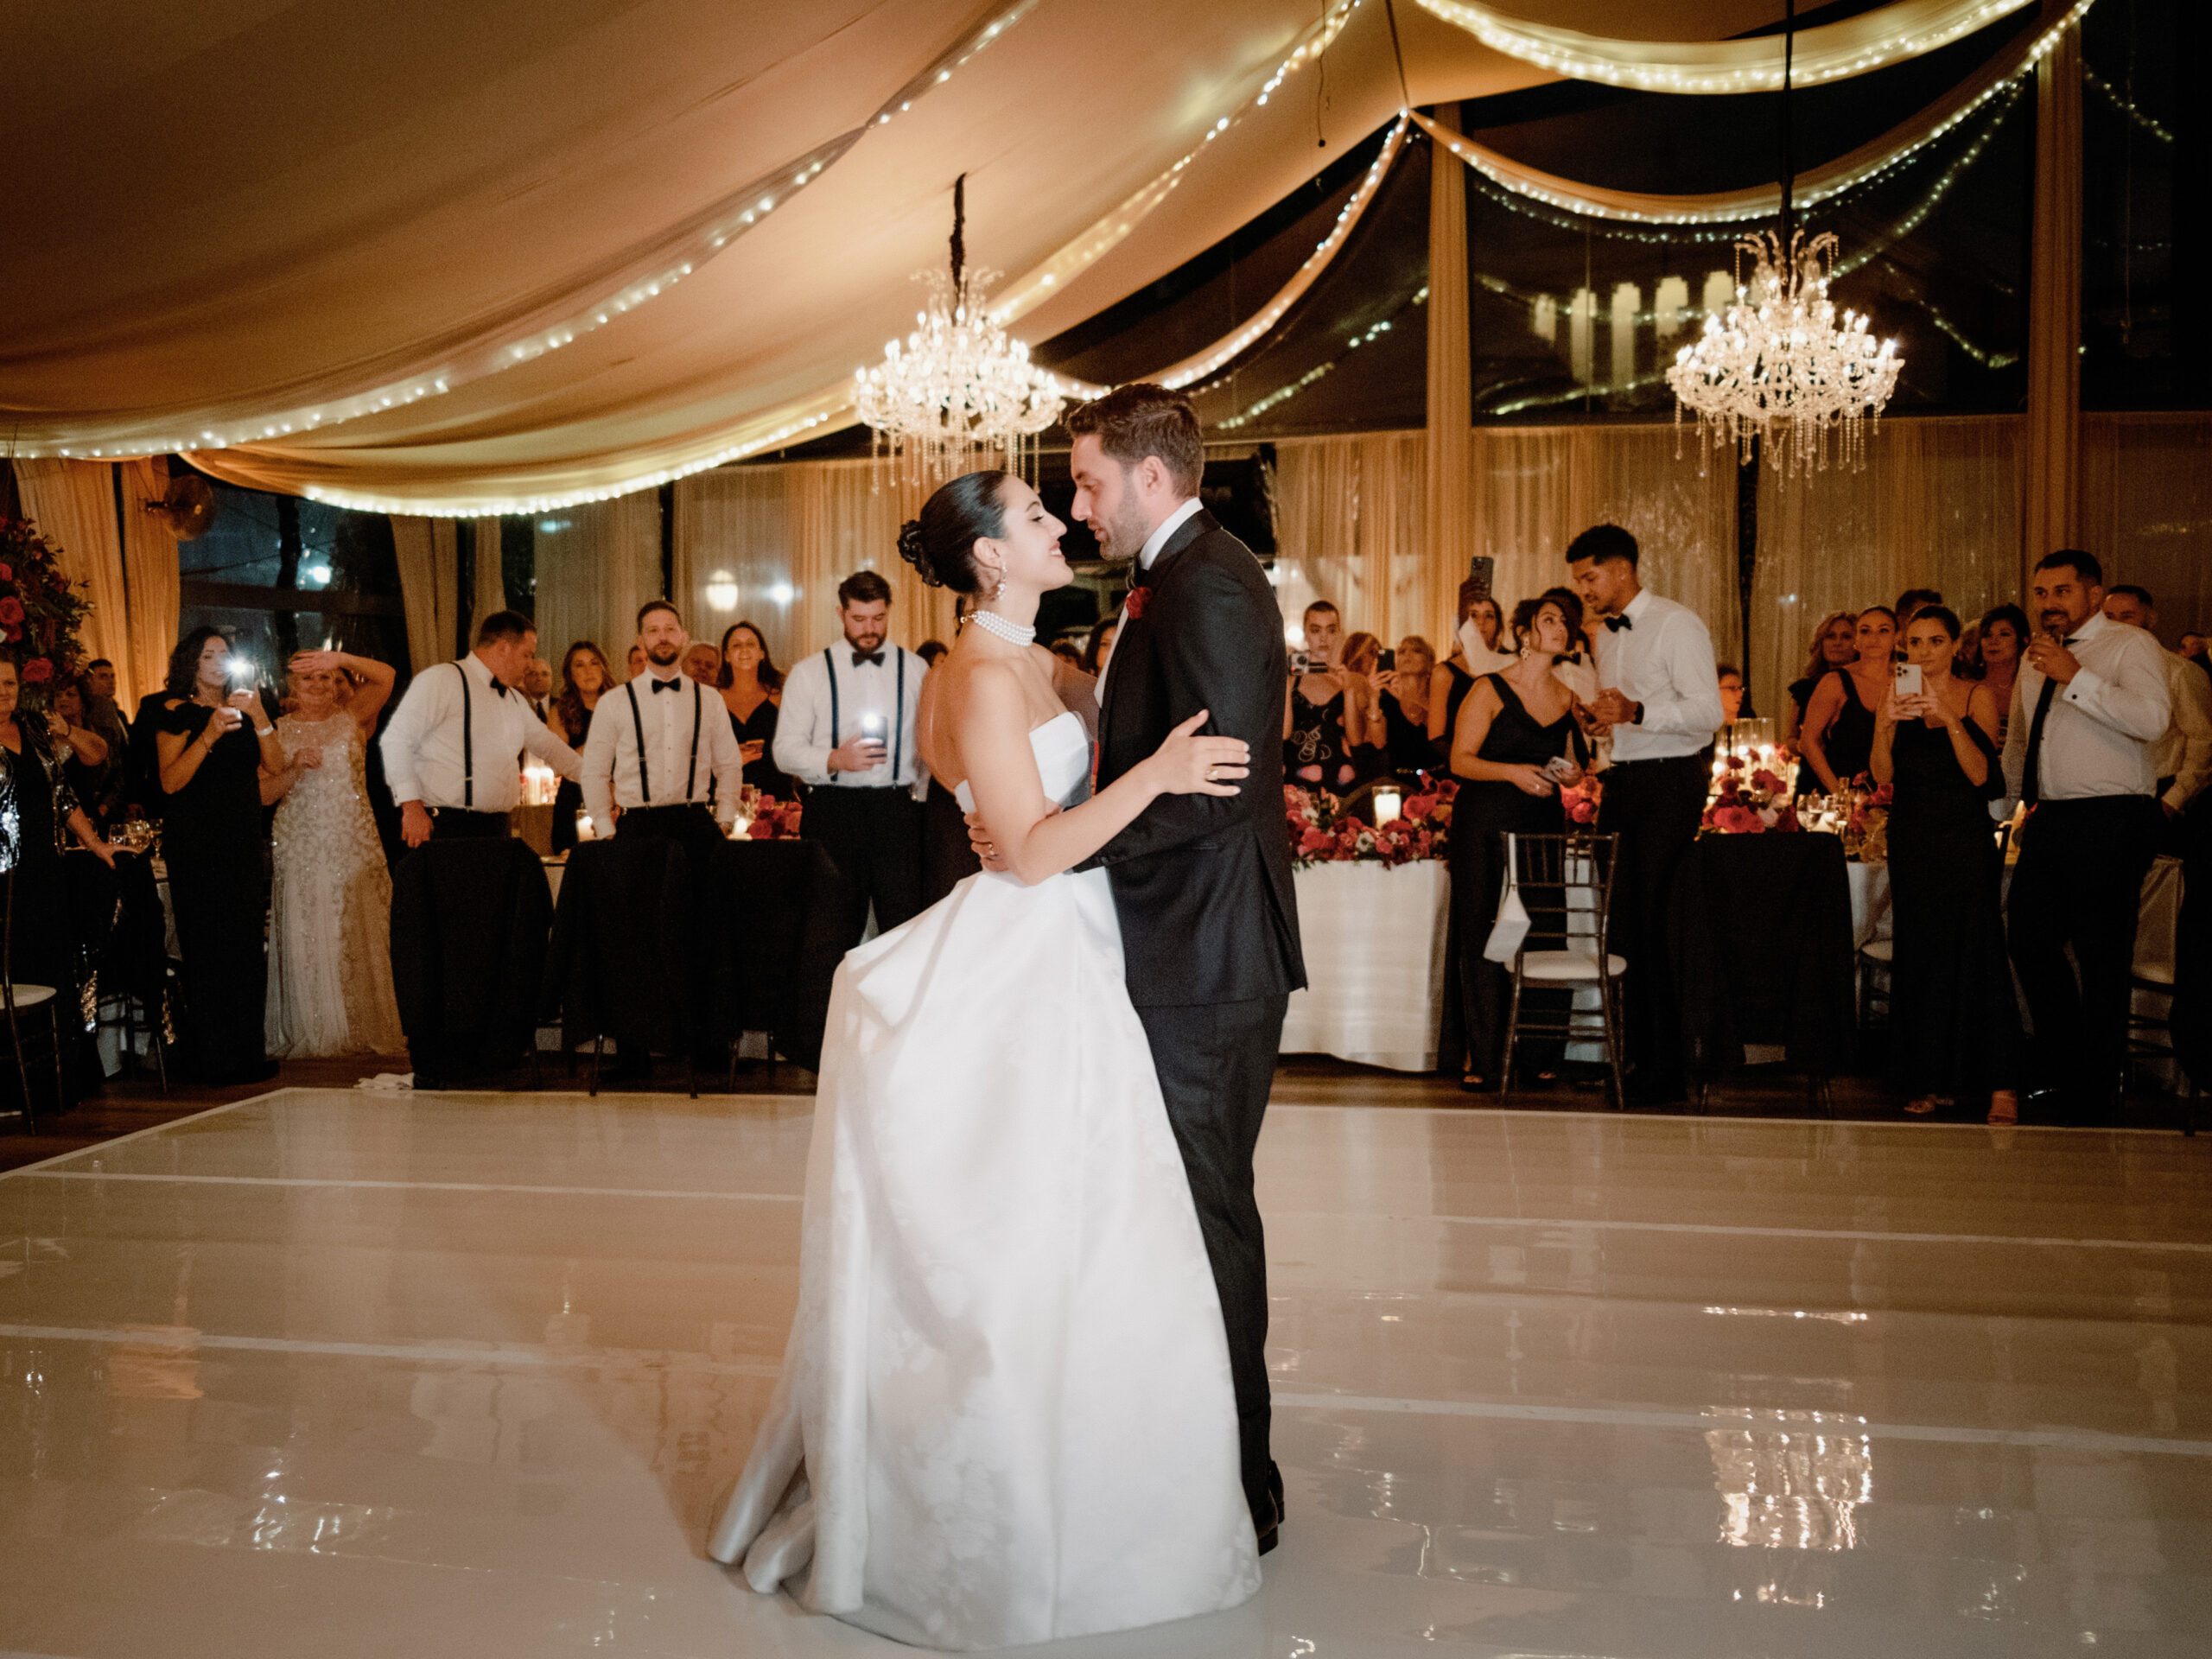 The bride and groom's first dance. Professional wedding photography Image by Jenny Fu Studio